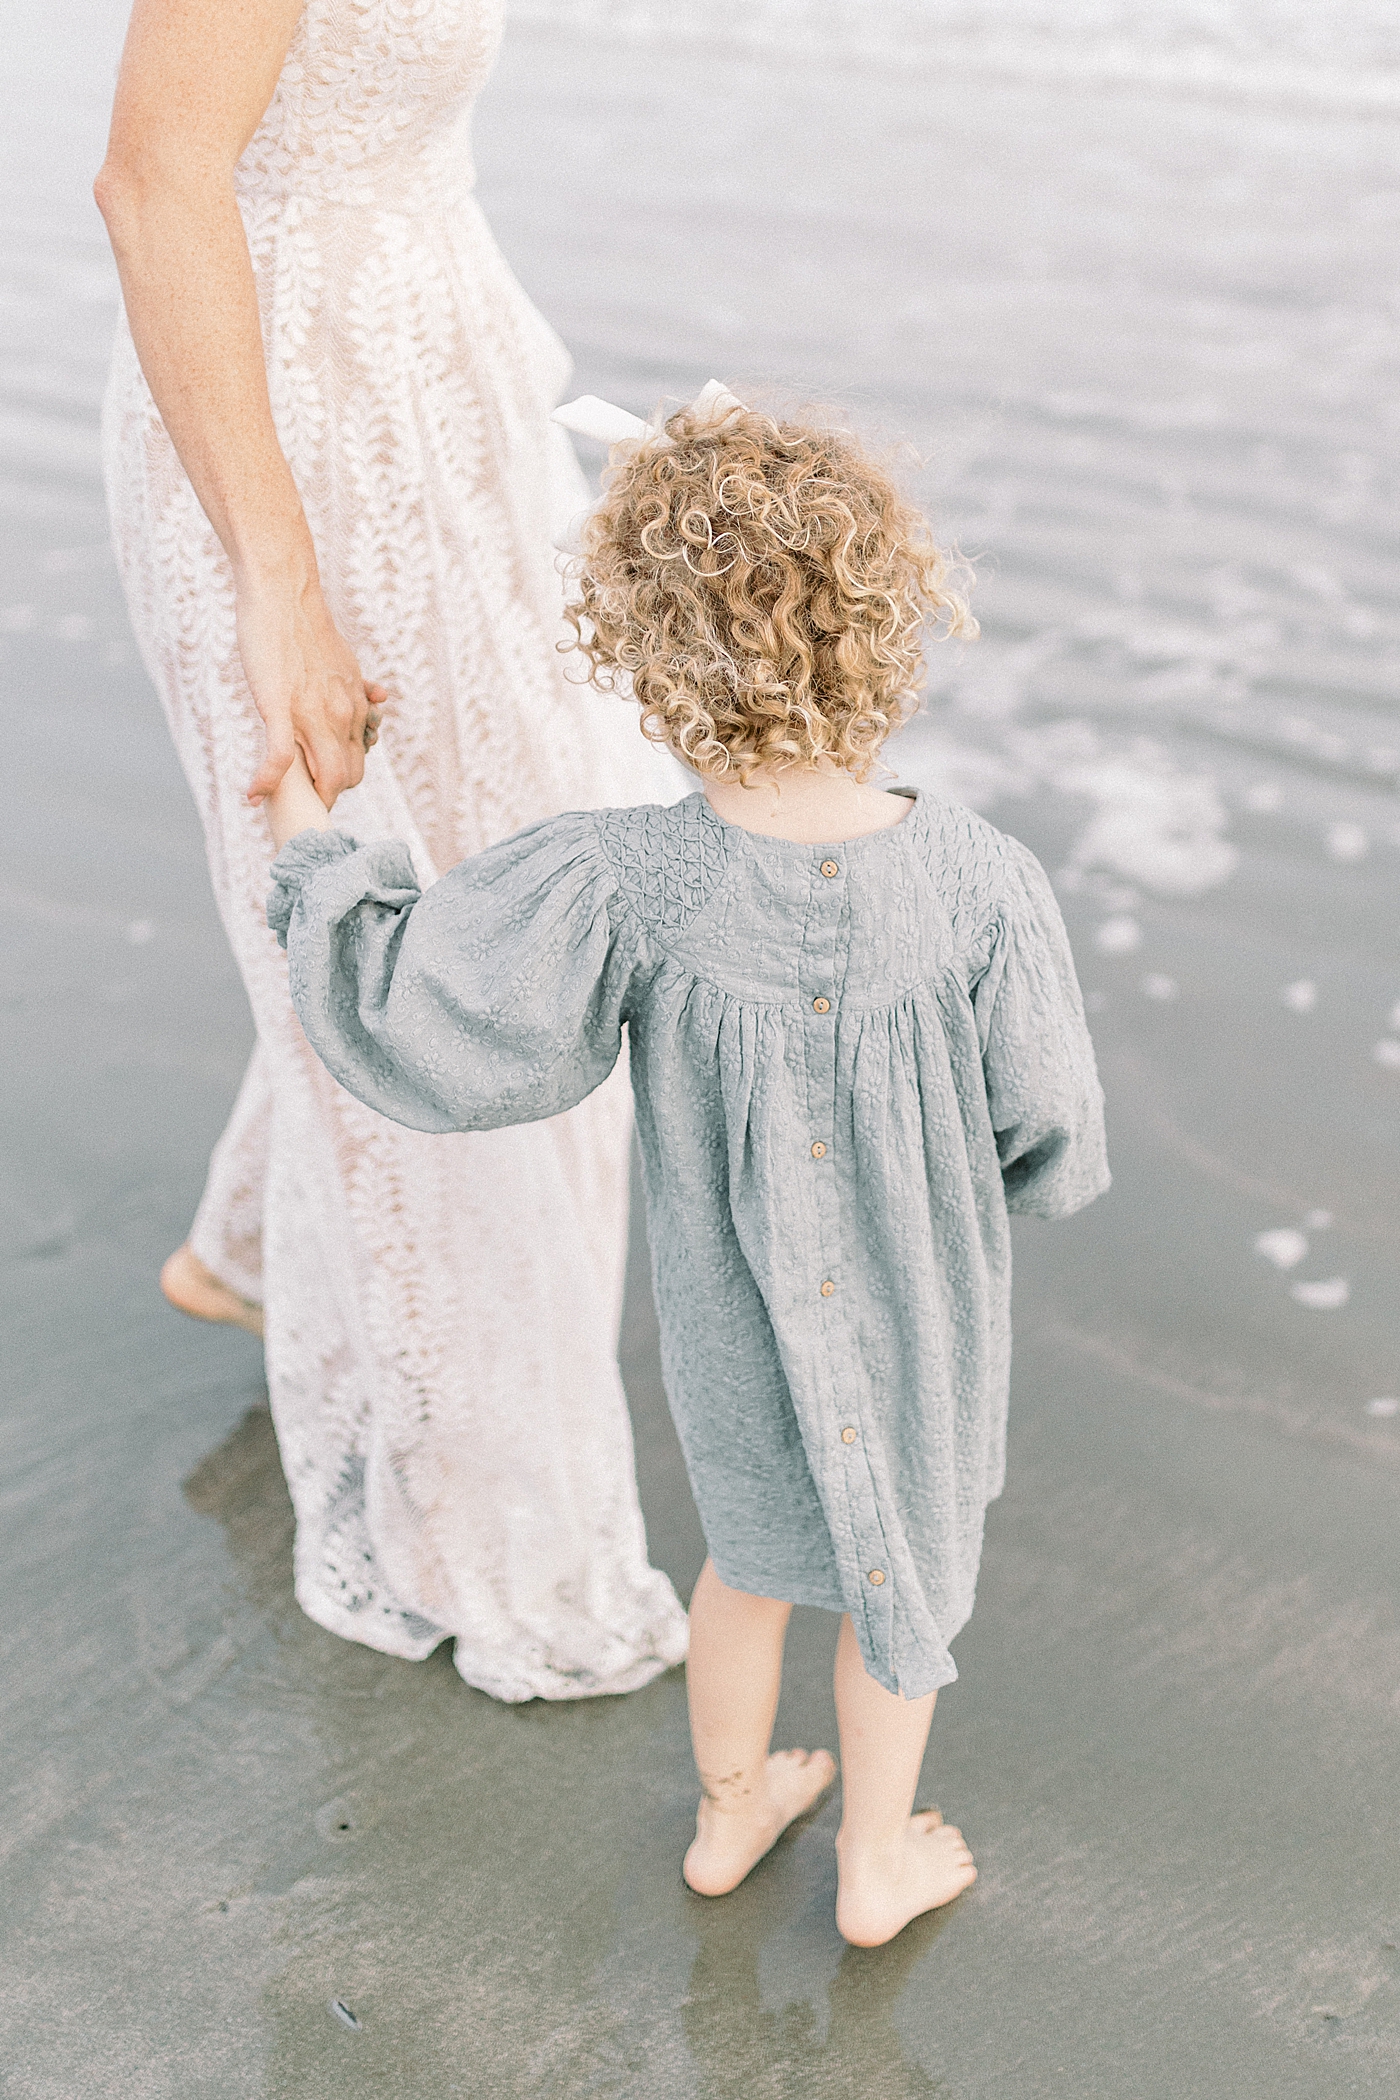 Mom and daughter walking near the water during fall family session at beach | Photo by Caitlyn Motycka Photography